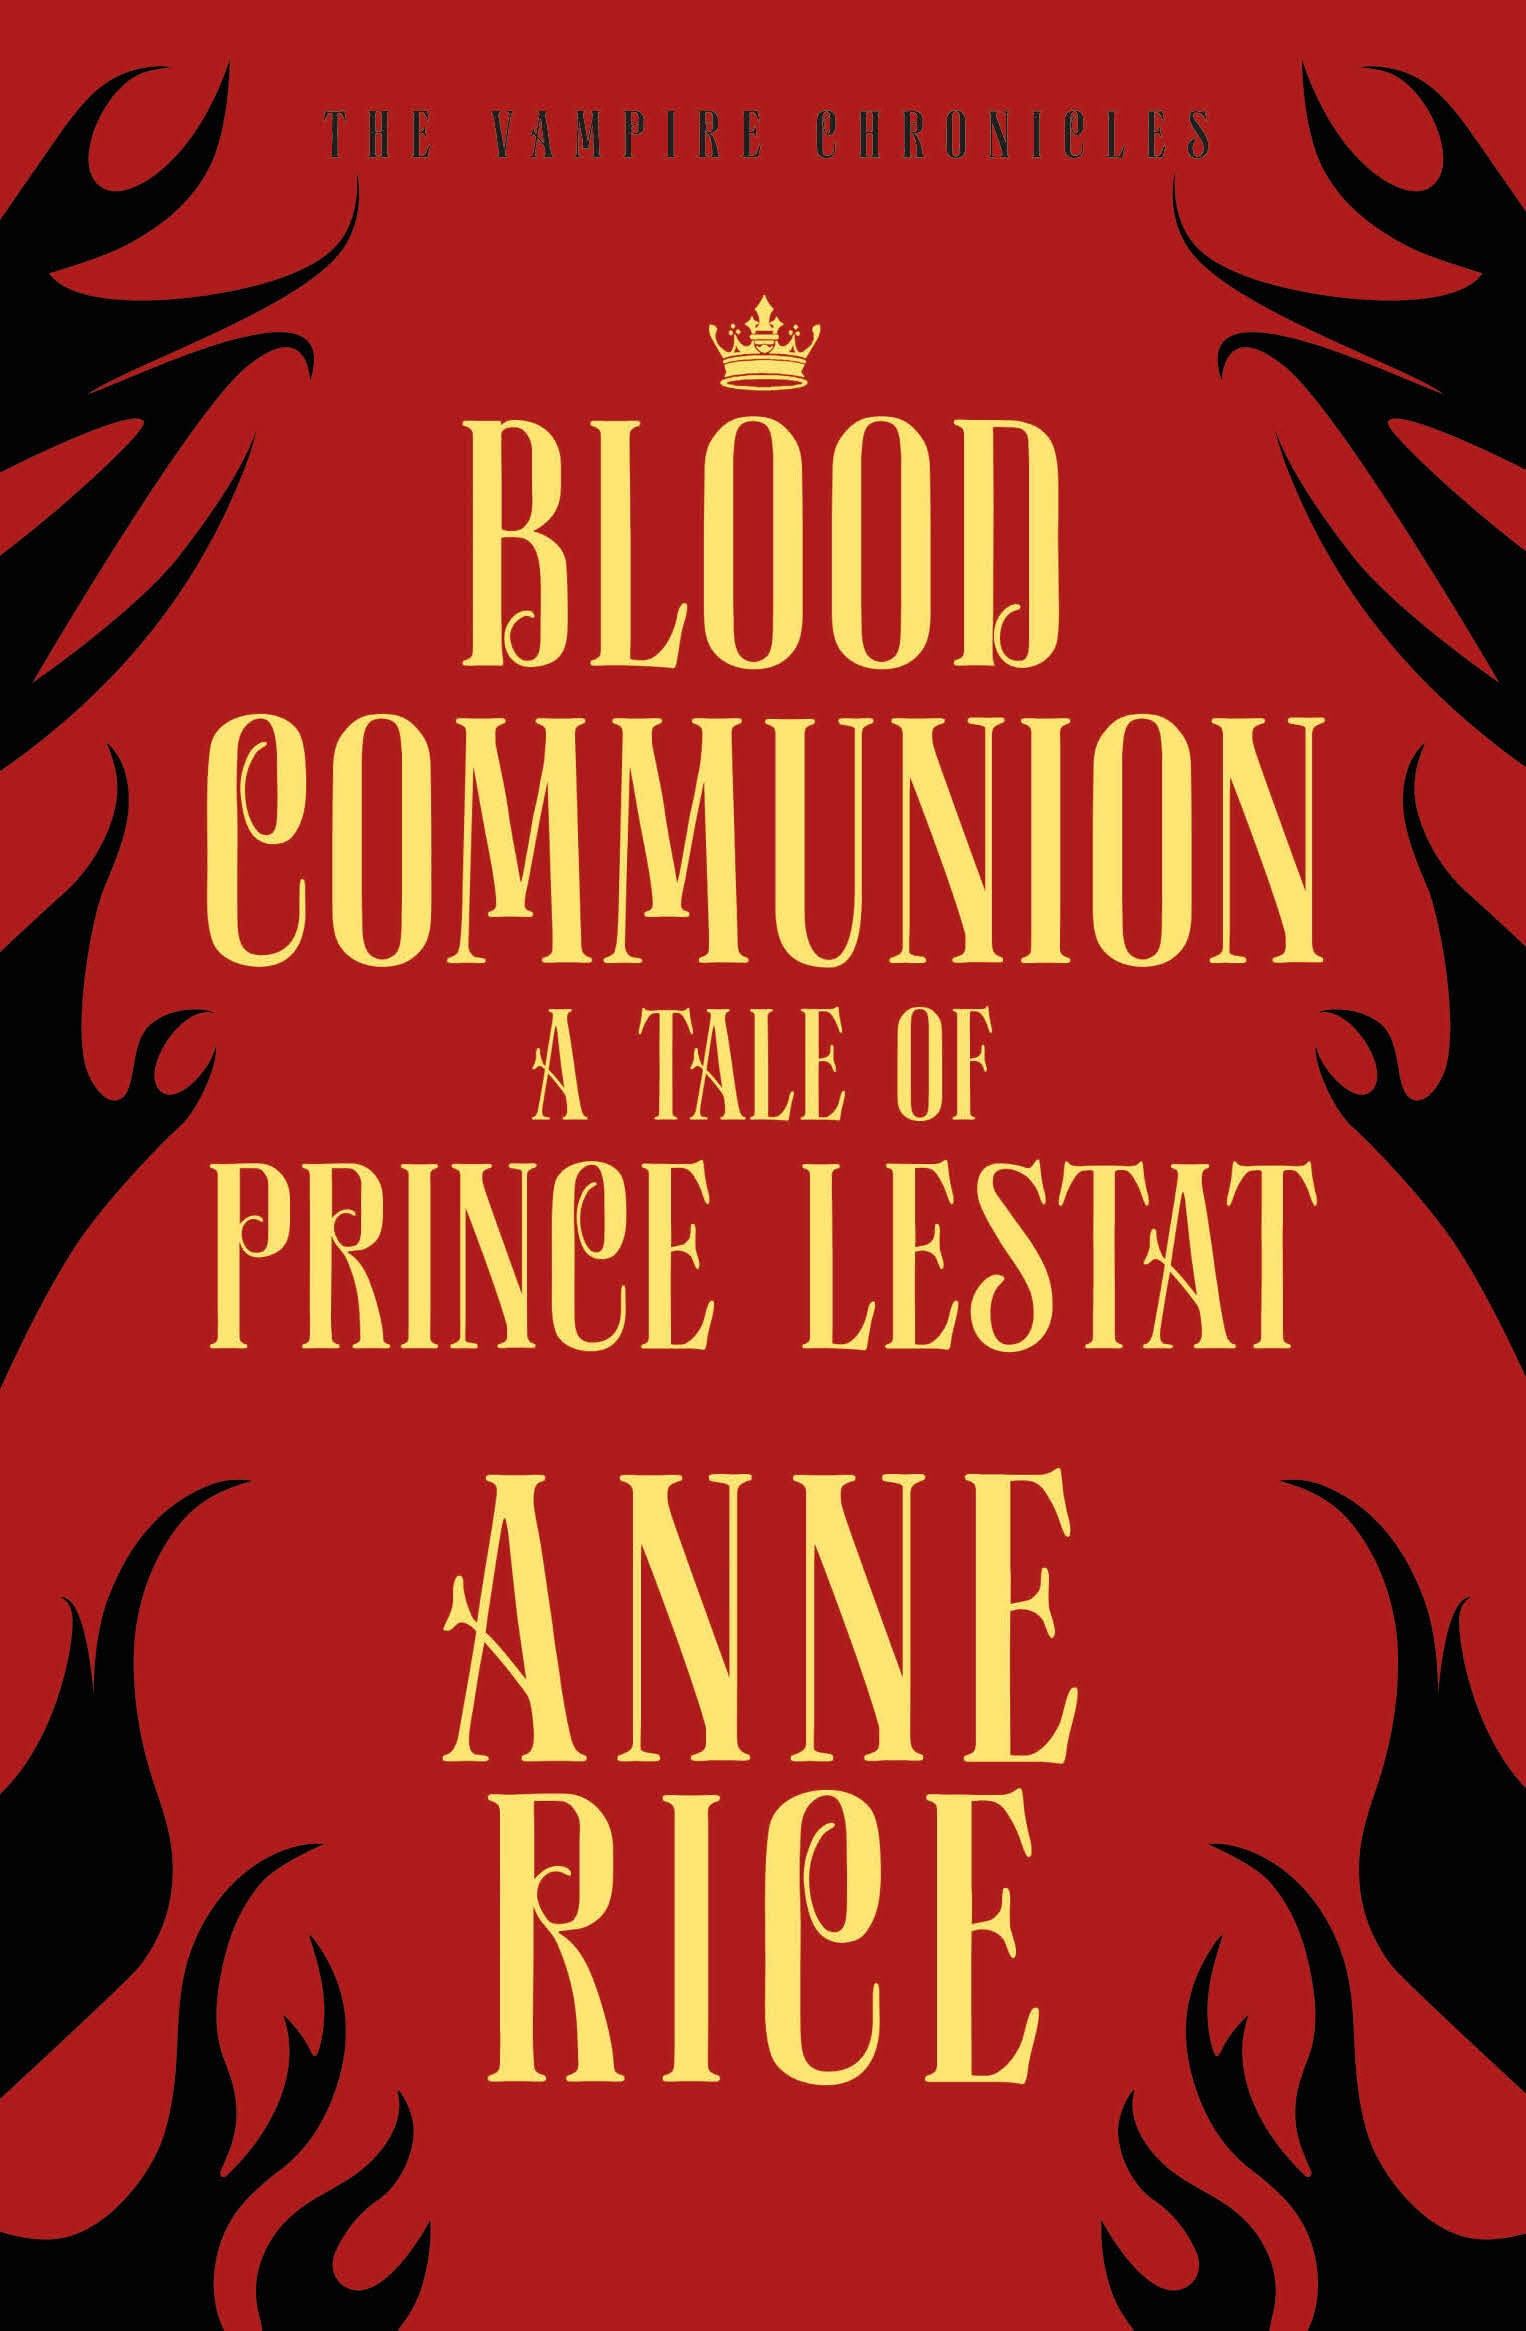 Book “Blood Communion” by Anne Rice — October 3, 2019